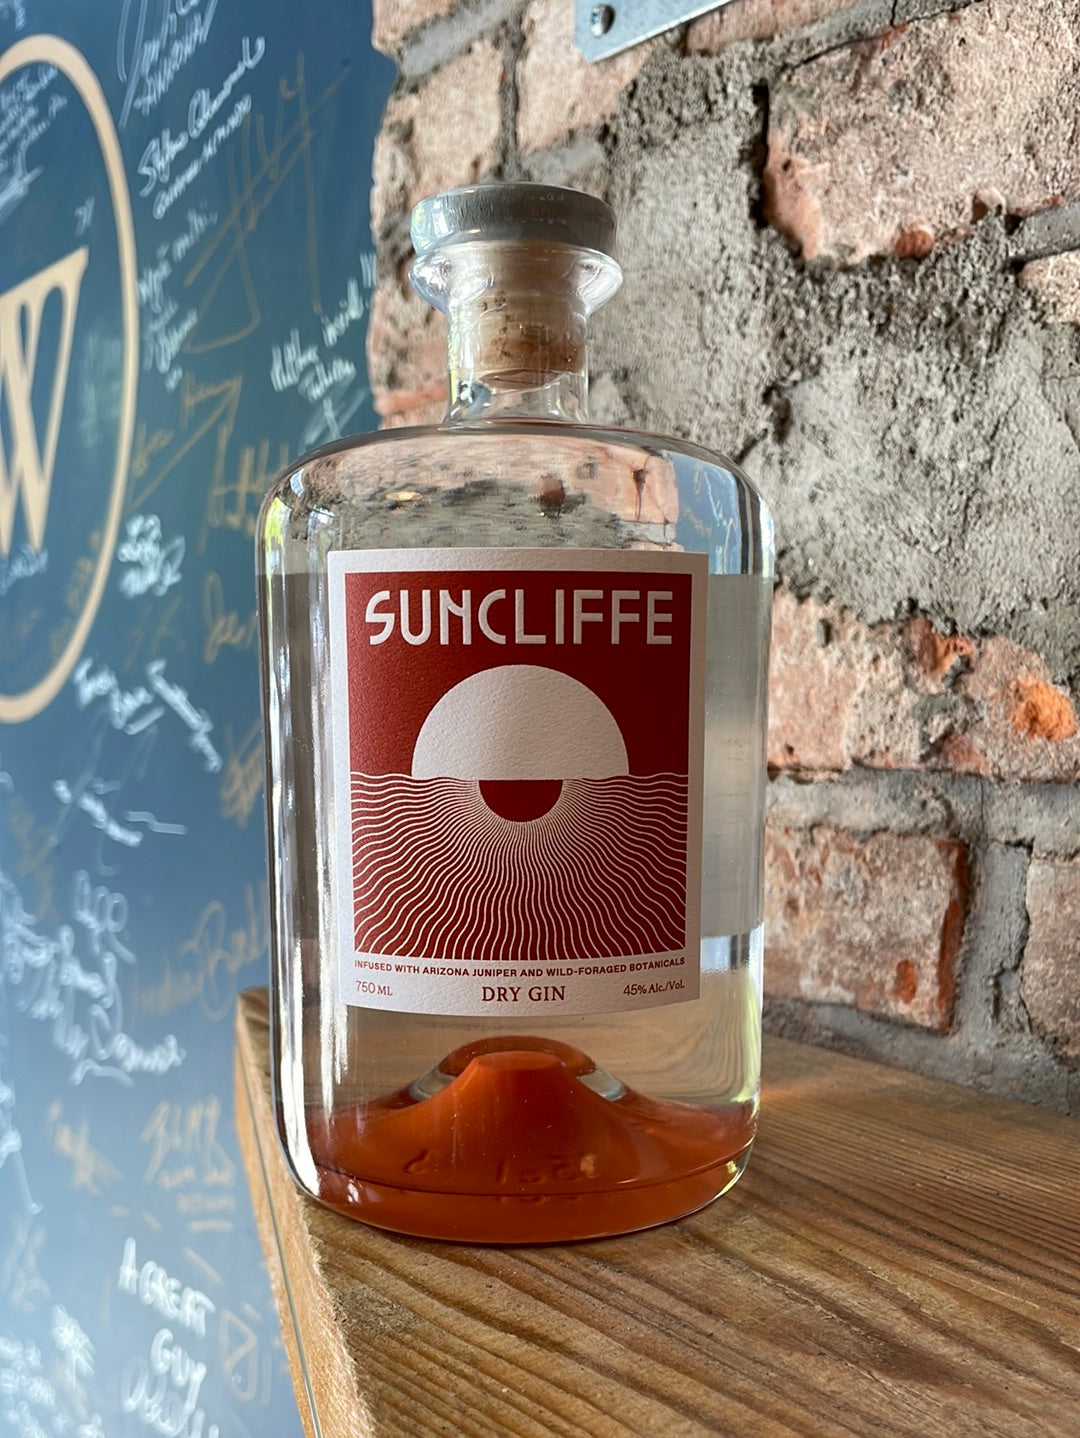 Suncliffe Dry Gin Arizona 750ml [NY STATE ONLY]